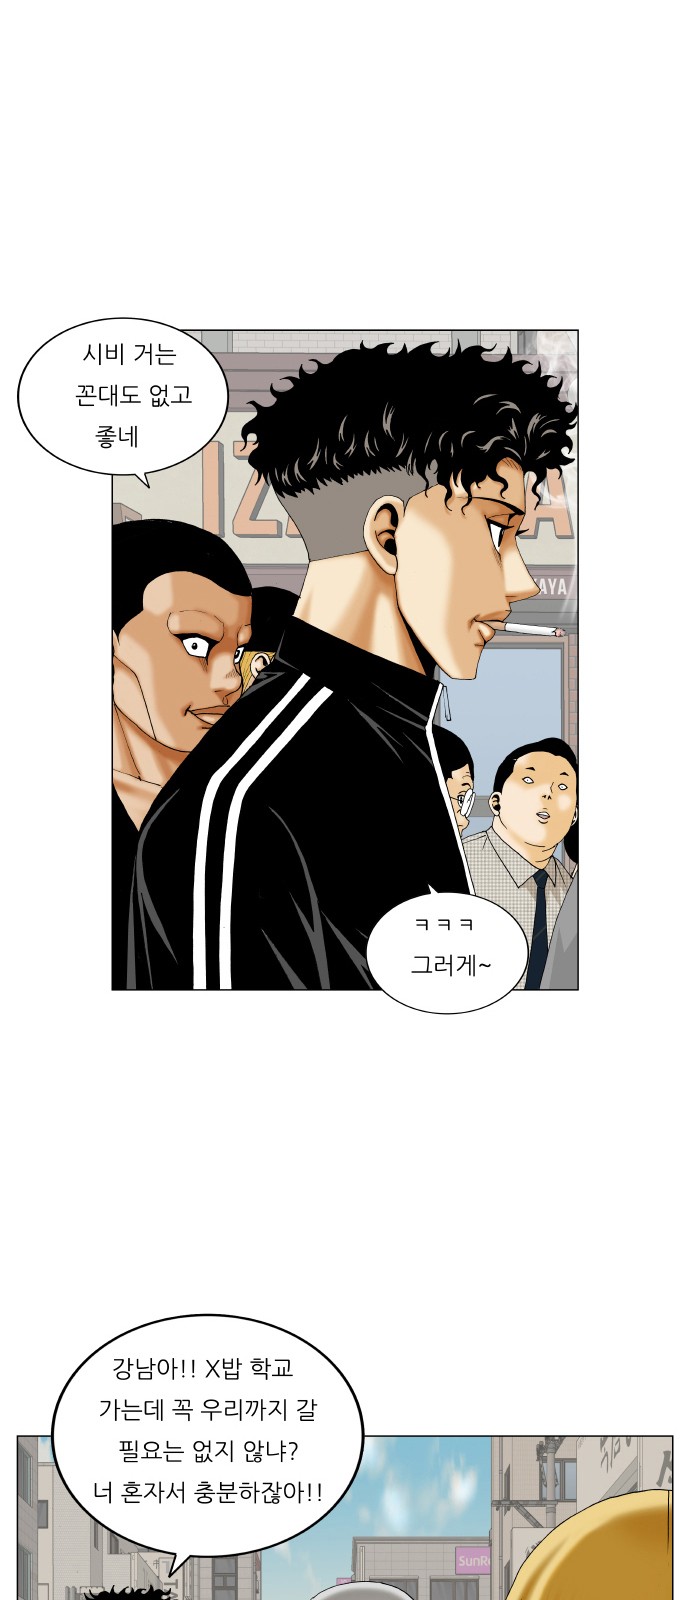 Ultimate Legend - Kang Hae Hyo - Chapter 283 - Page 2